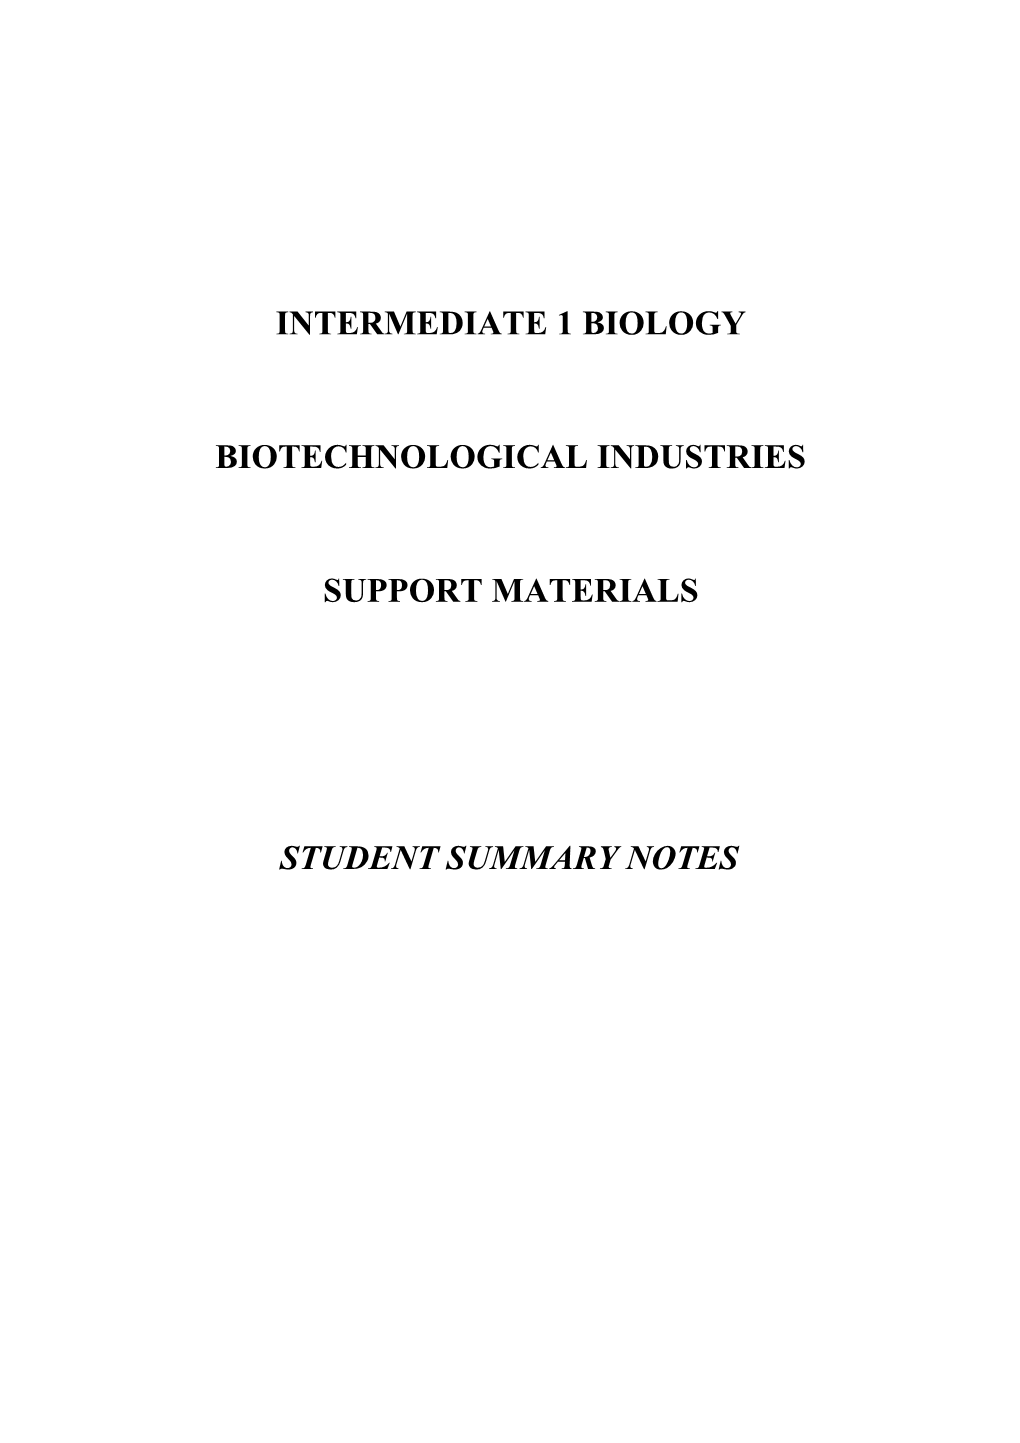 Draft Rationale for Higher Biology Course